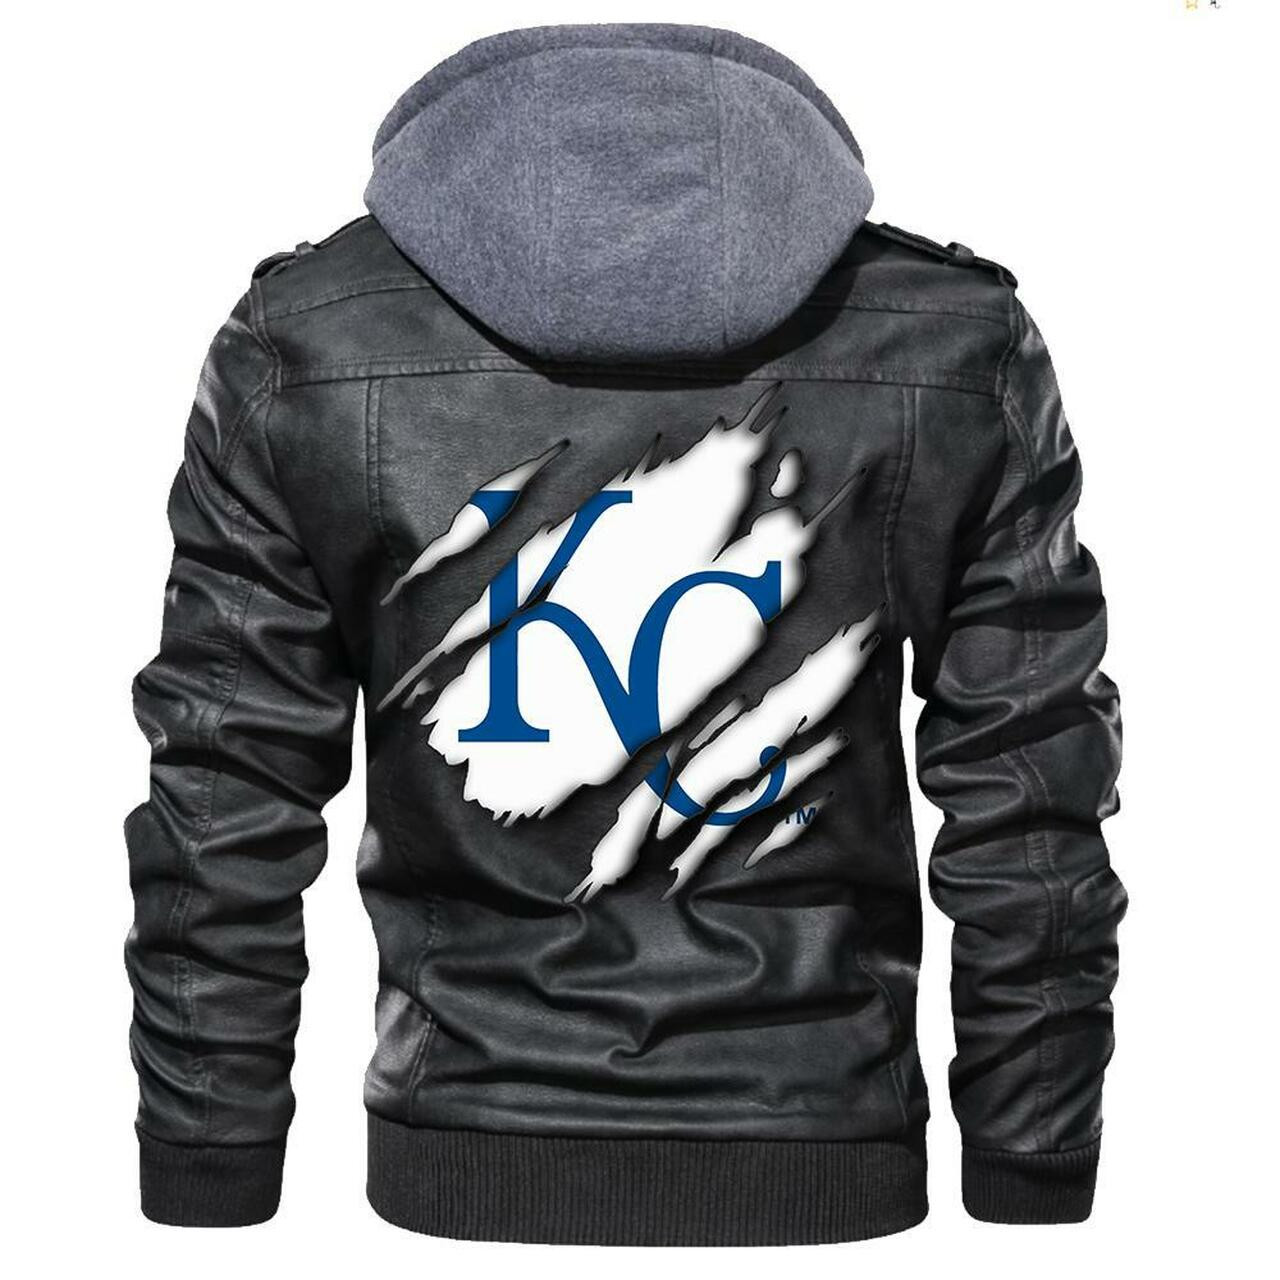 You can find Leather Jacket online at a great price 96